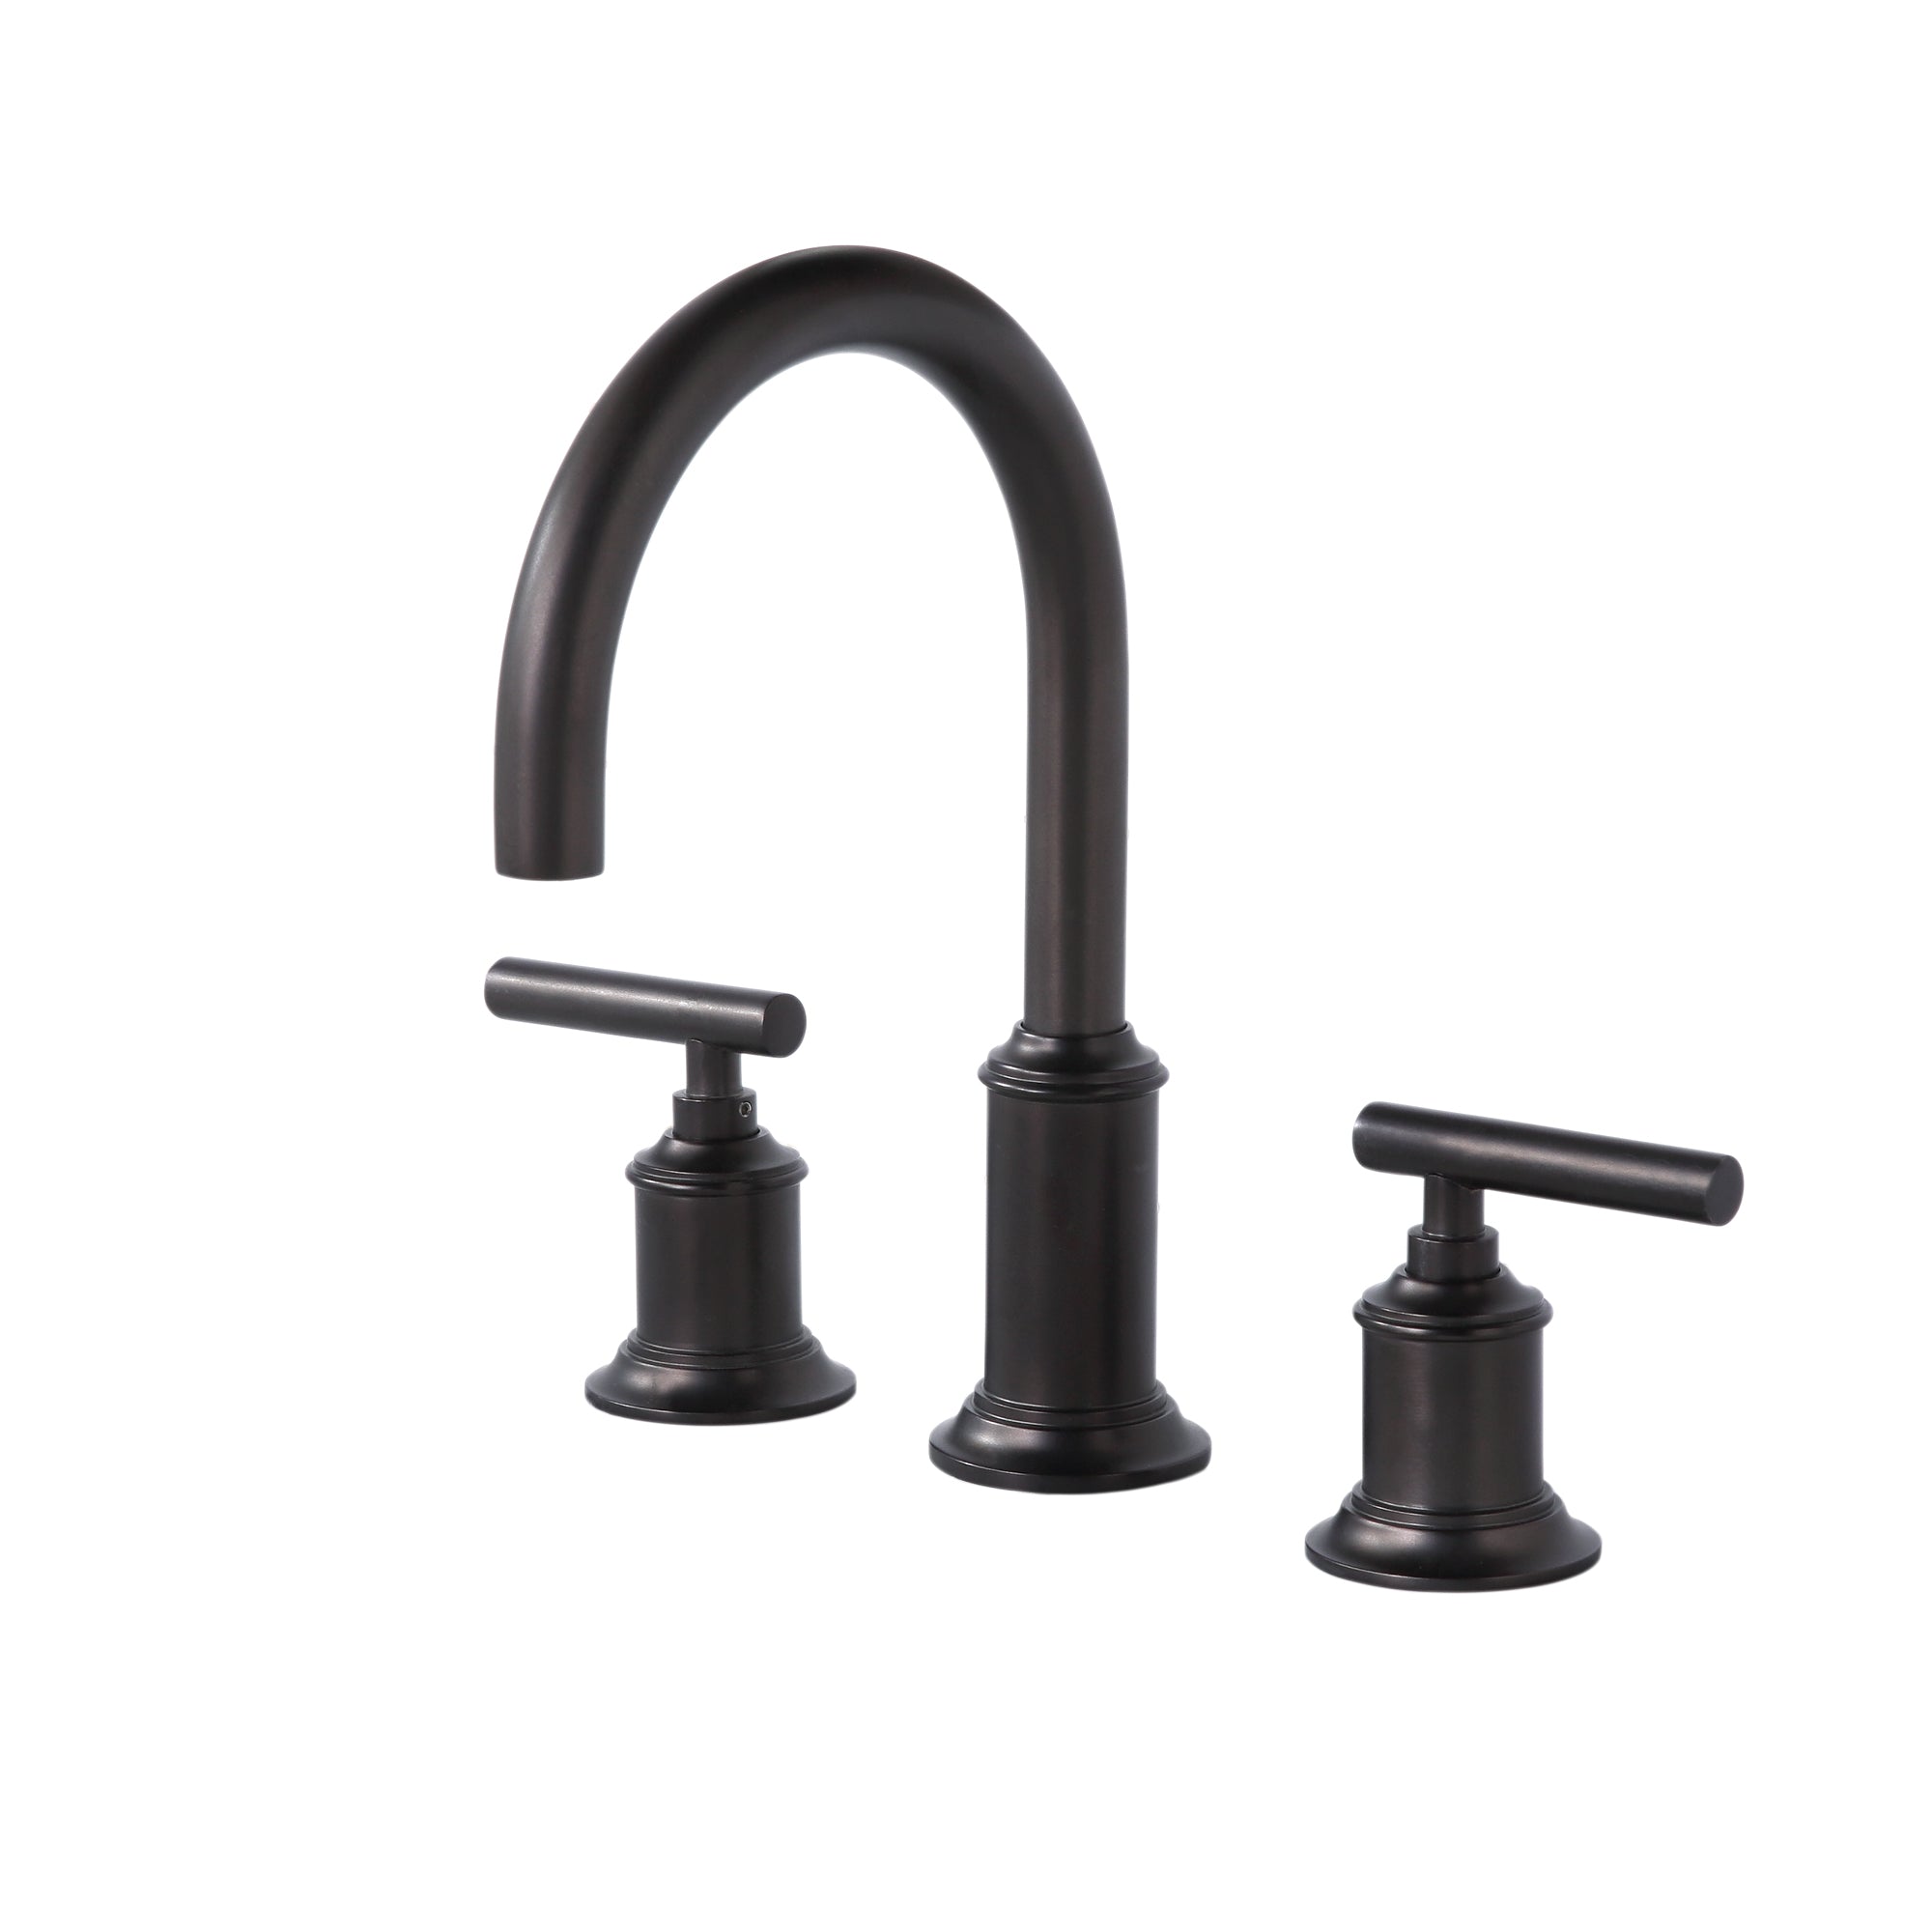 Water Creation Modern Gooseneck Spout Widespread Faucet F2-0014 in Oil-Rubbed Bronze